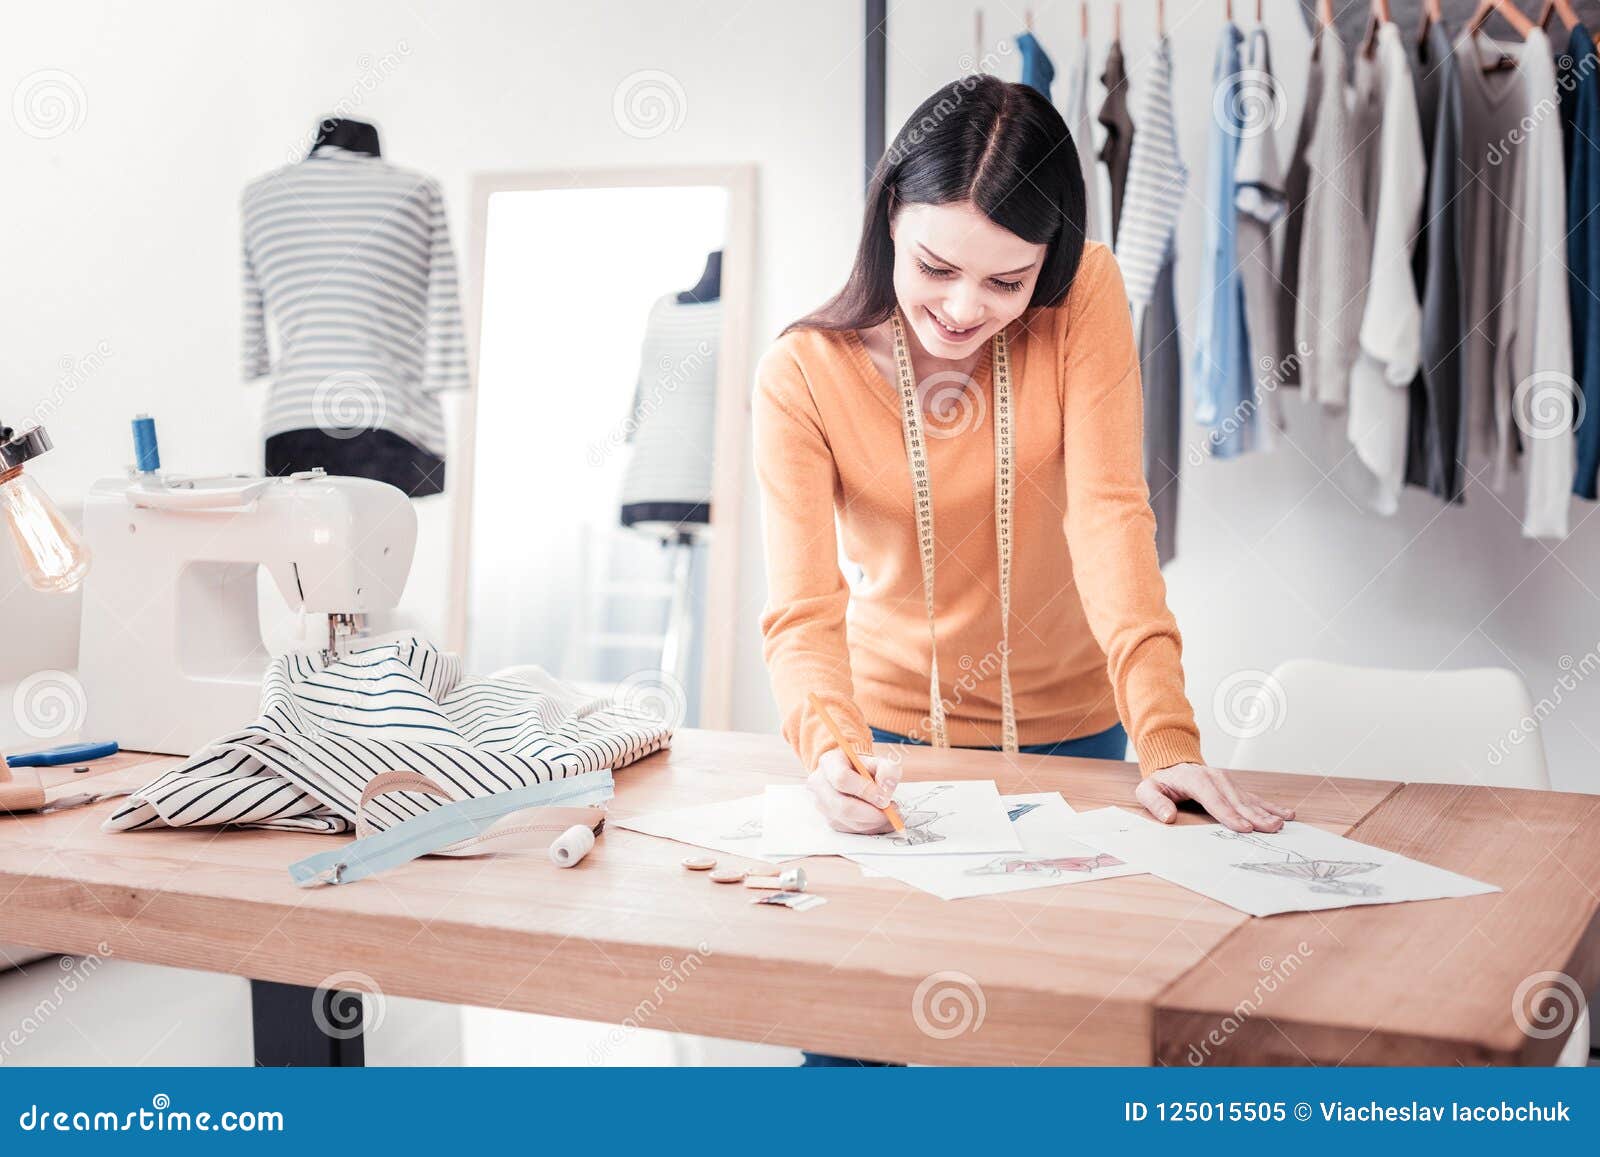 Concentrated Designer Creating New Drafts with Clothes Stock Image ...